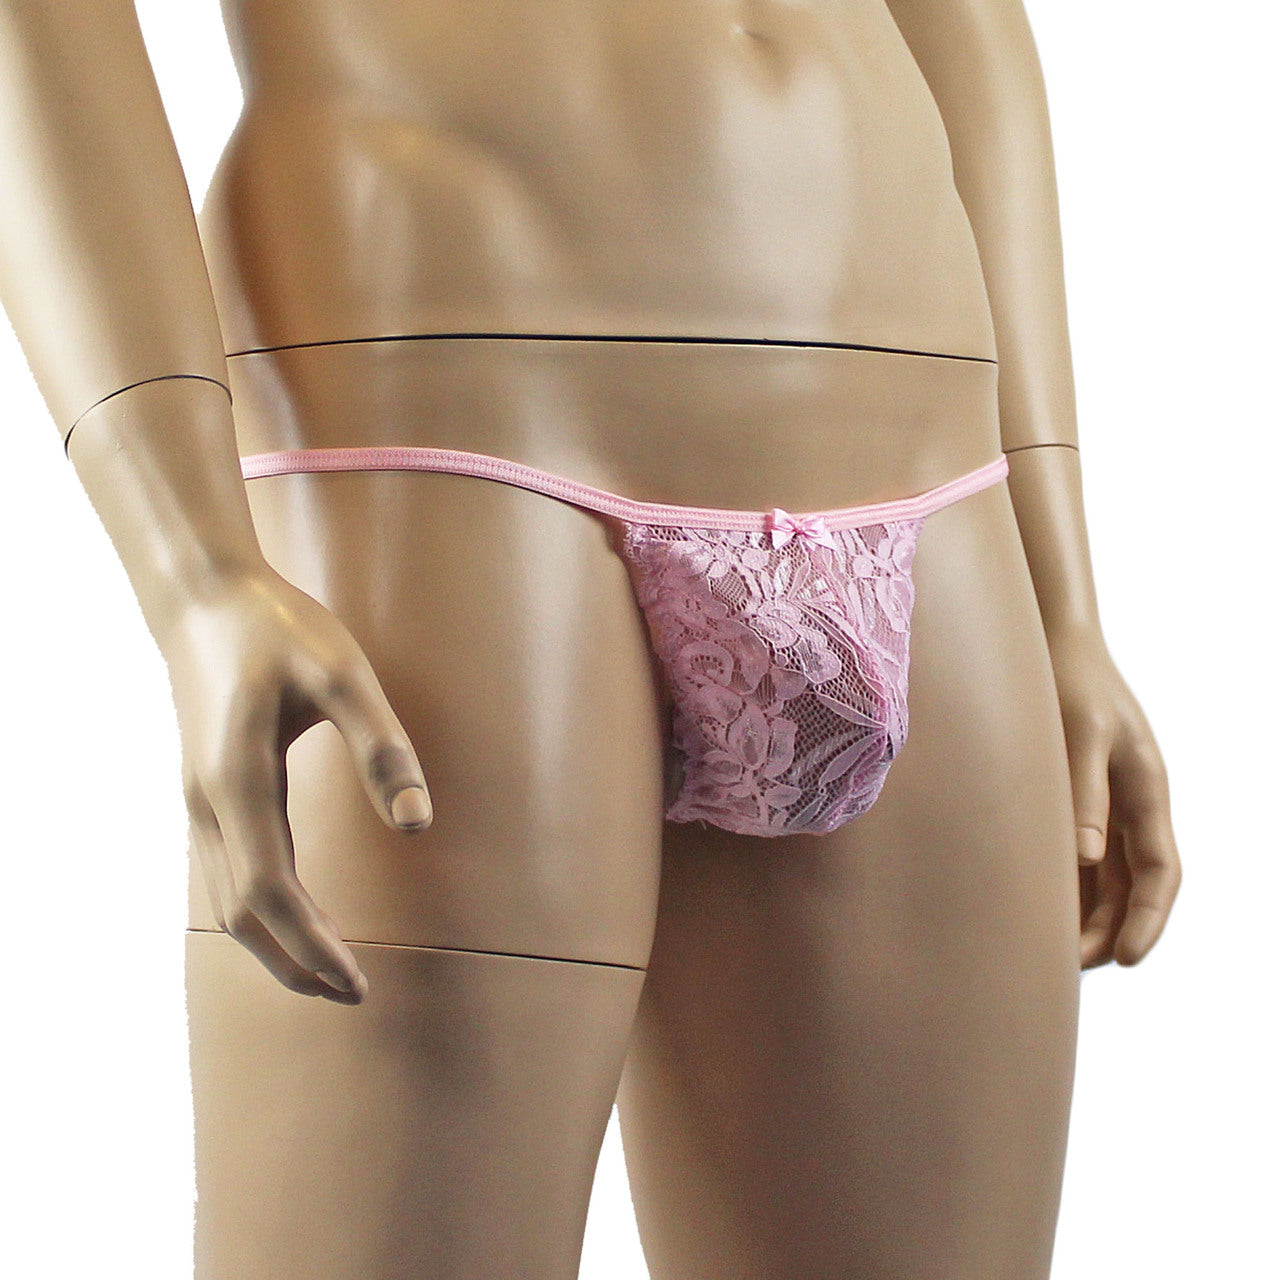 Mens Sexy Lace Pouch G string Panty Male Lingerie (light pink plus other colours)